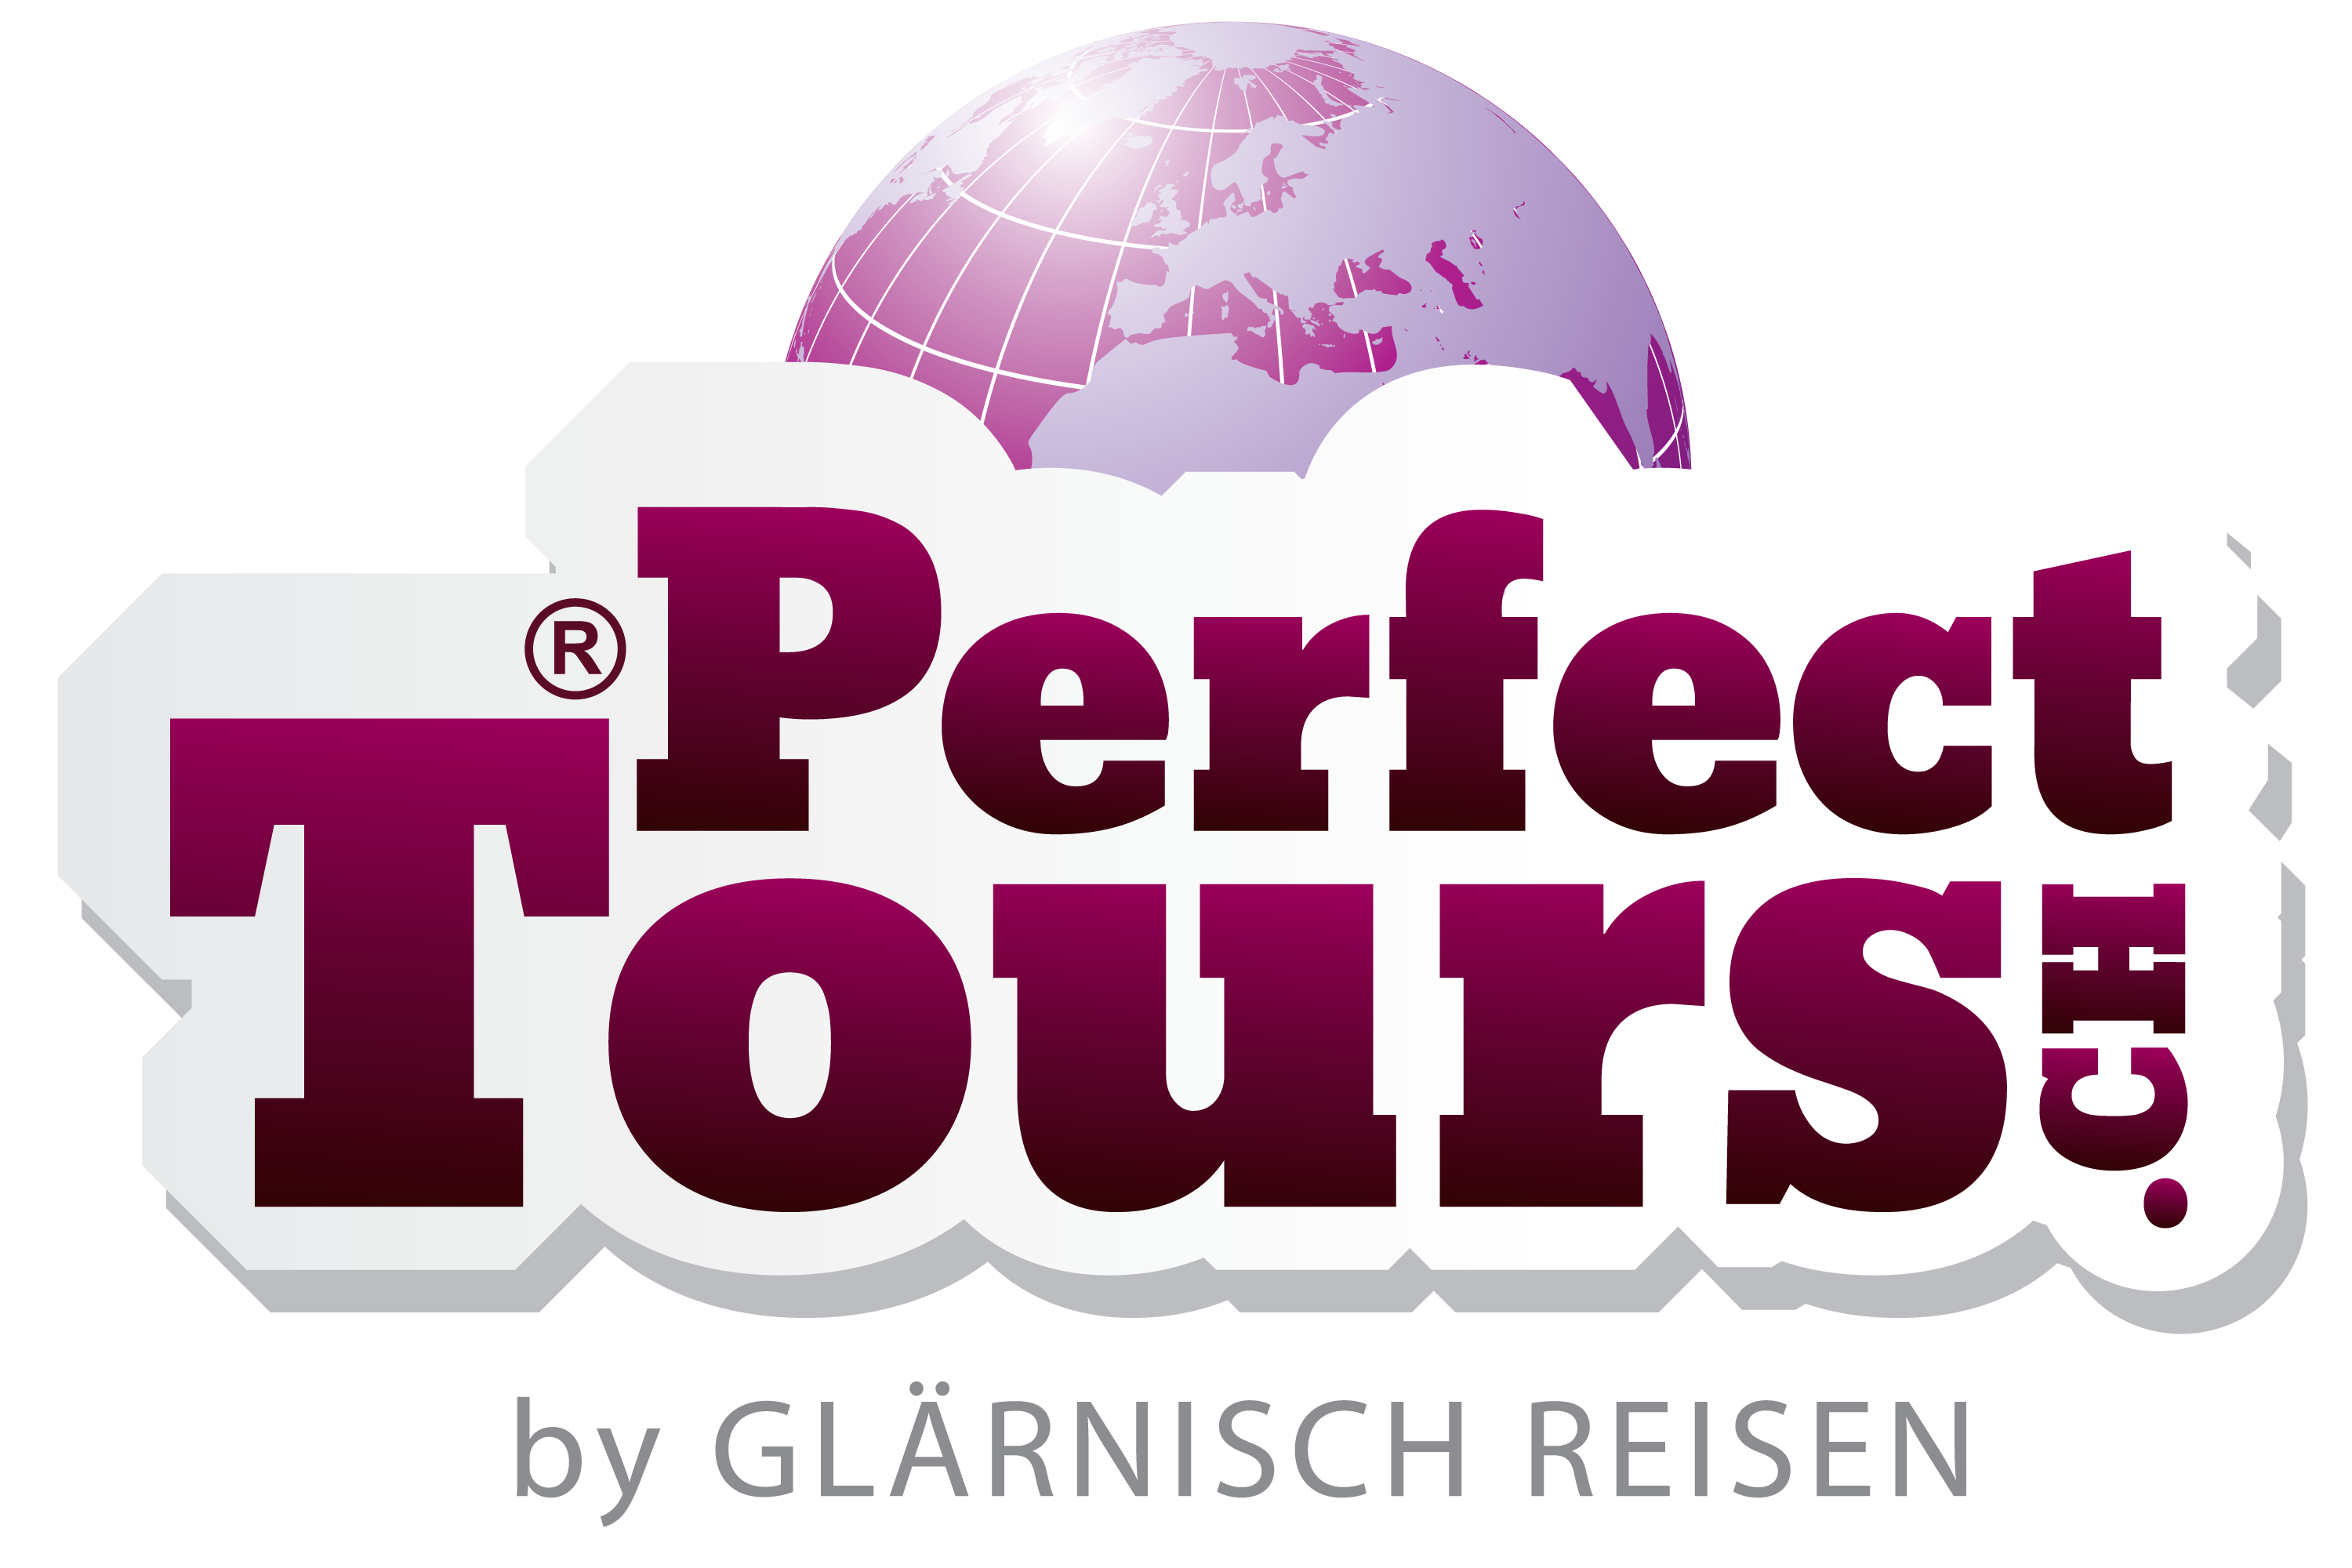 (c) Perfect-tours.ch